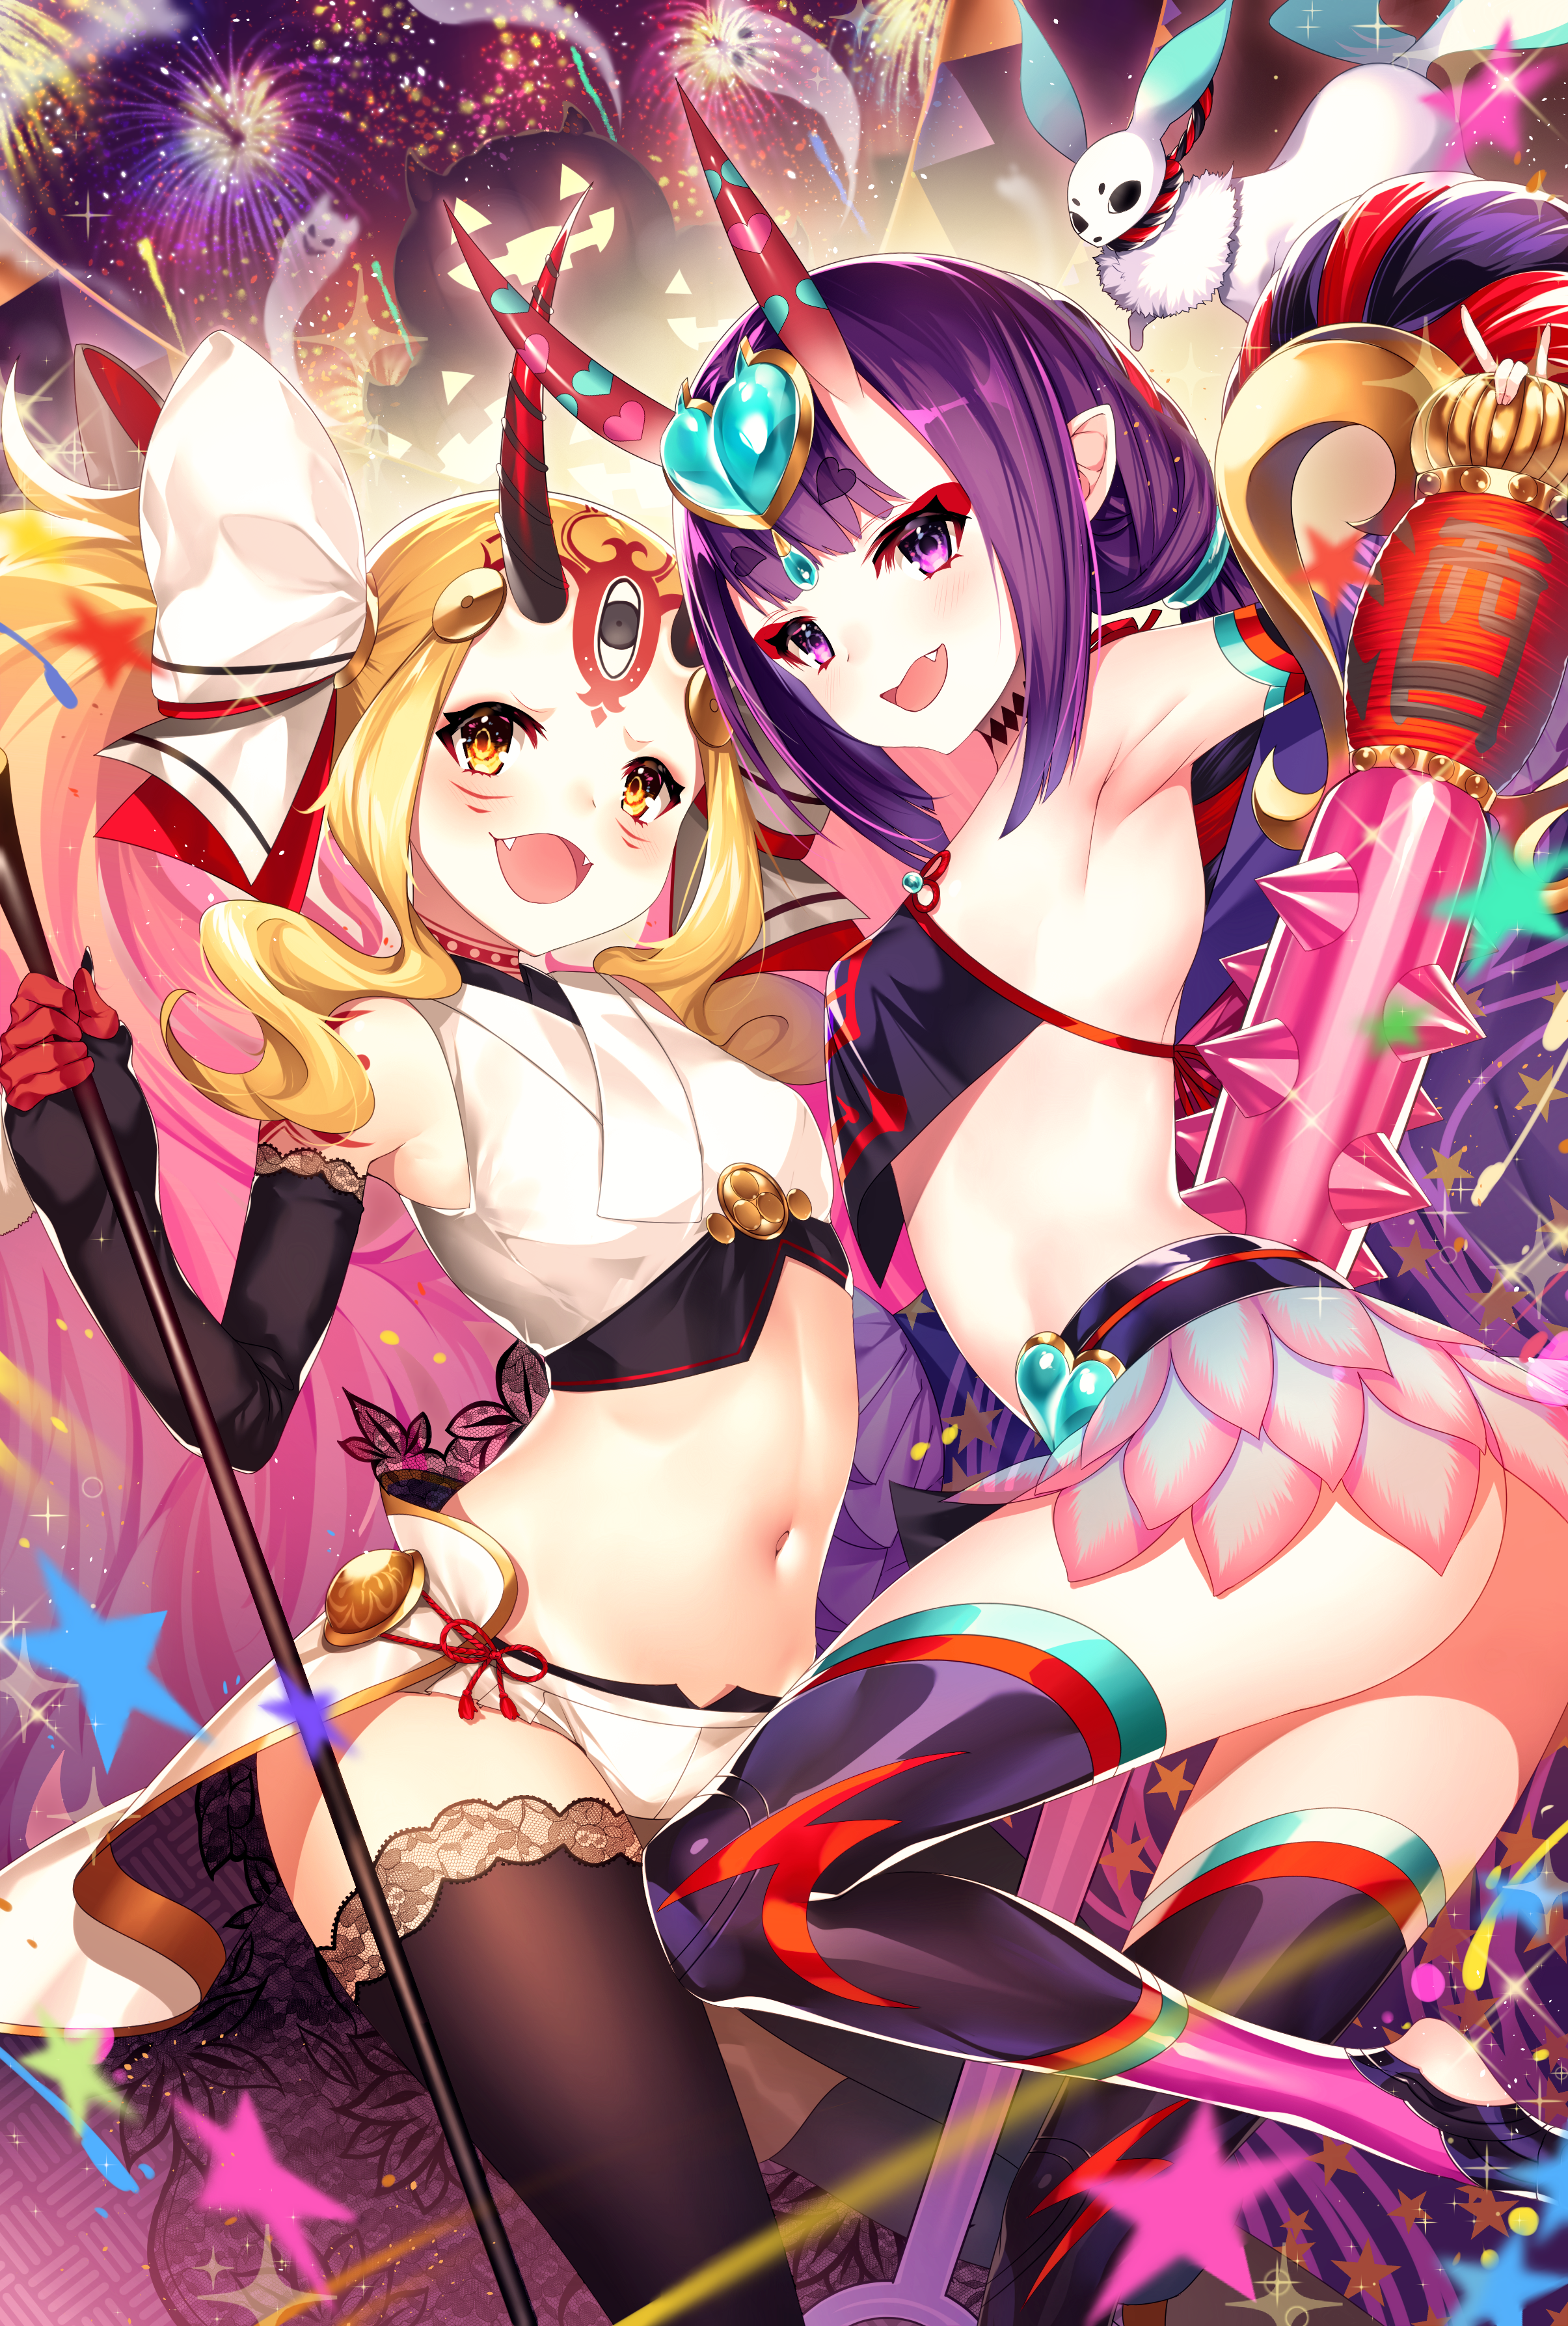 Anime 2410x3575 Hamada Pochiwo Fate series Fate/Grand Order shorts Ibaraki Douji Shuten Douji (Fate/Grand Order) long hair fireworks ass black gloves blonde blurry background blushing brown eyes chinese clothing crop top depth of field elbow gloves fangs fingerless gloves fingernails gloves Halloween heart horns twintails toeless legwear thigh-highs spikes smiling small boobs purple eyes open mouth short shorts belly lace anime girls loli